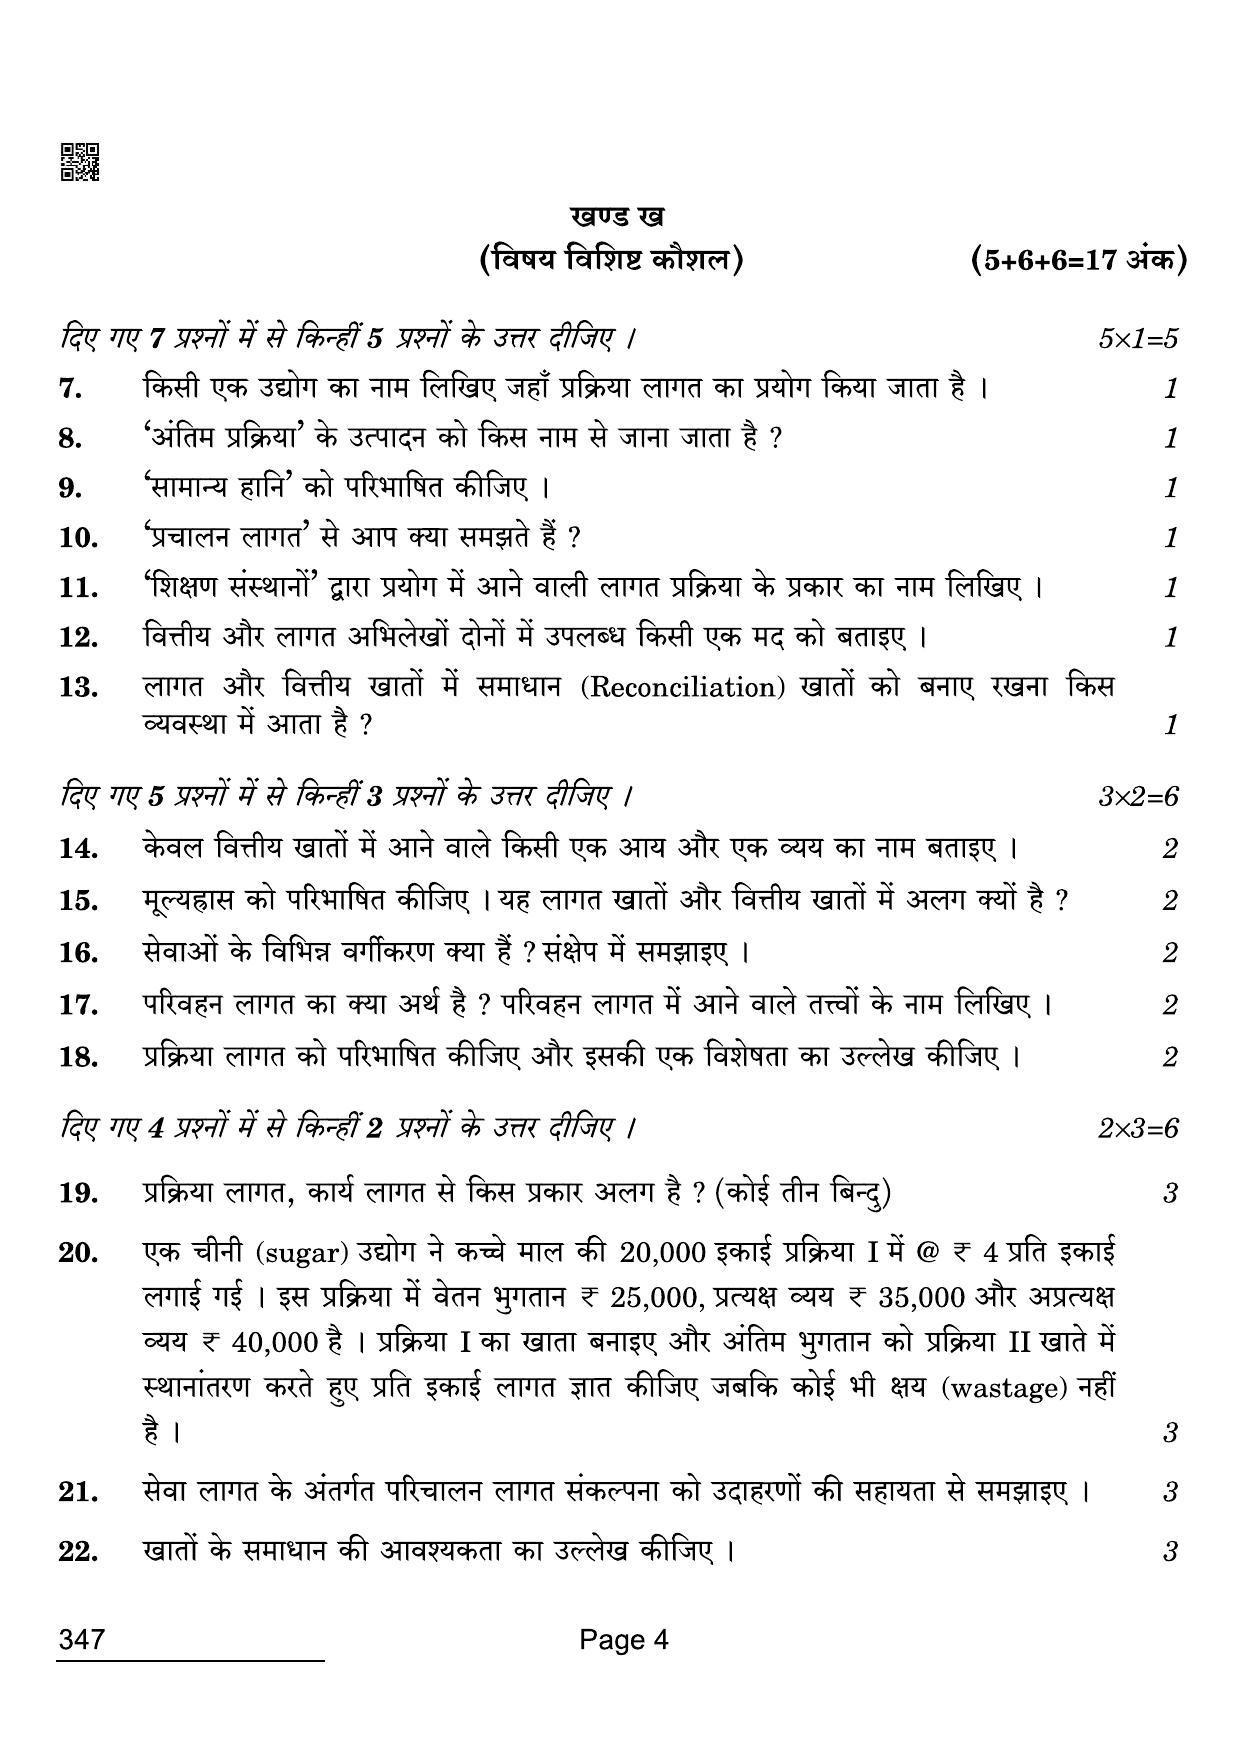 CBSE Class 12 347 Cost Accounting 2022 Compartment Question Paper - Page 4